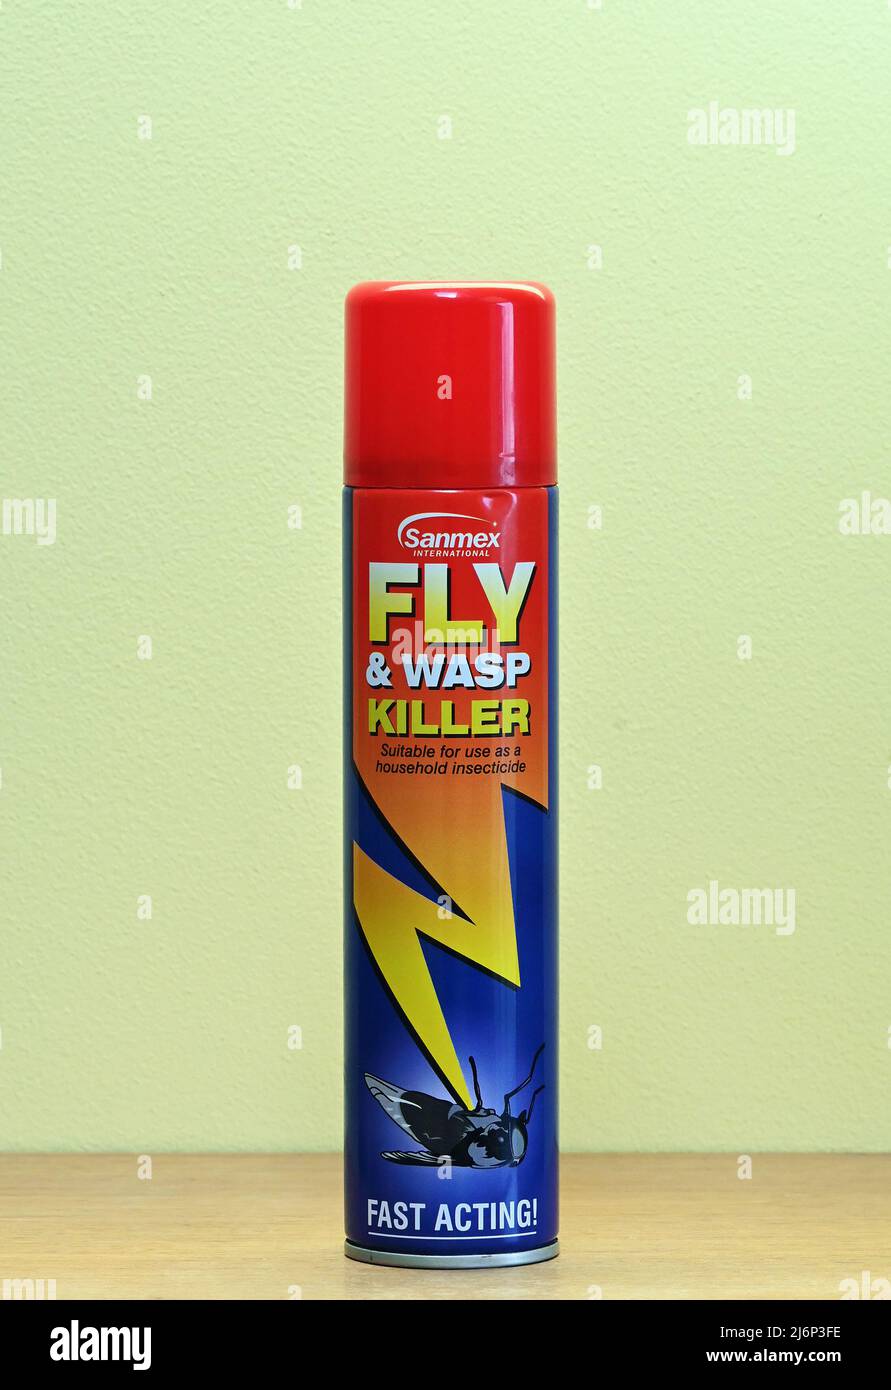 Sanmex International. Fly & Wasp Killer. Suitable for use as a household insecticide. Fast Acting! Spray can. Stock Photo